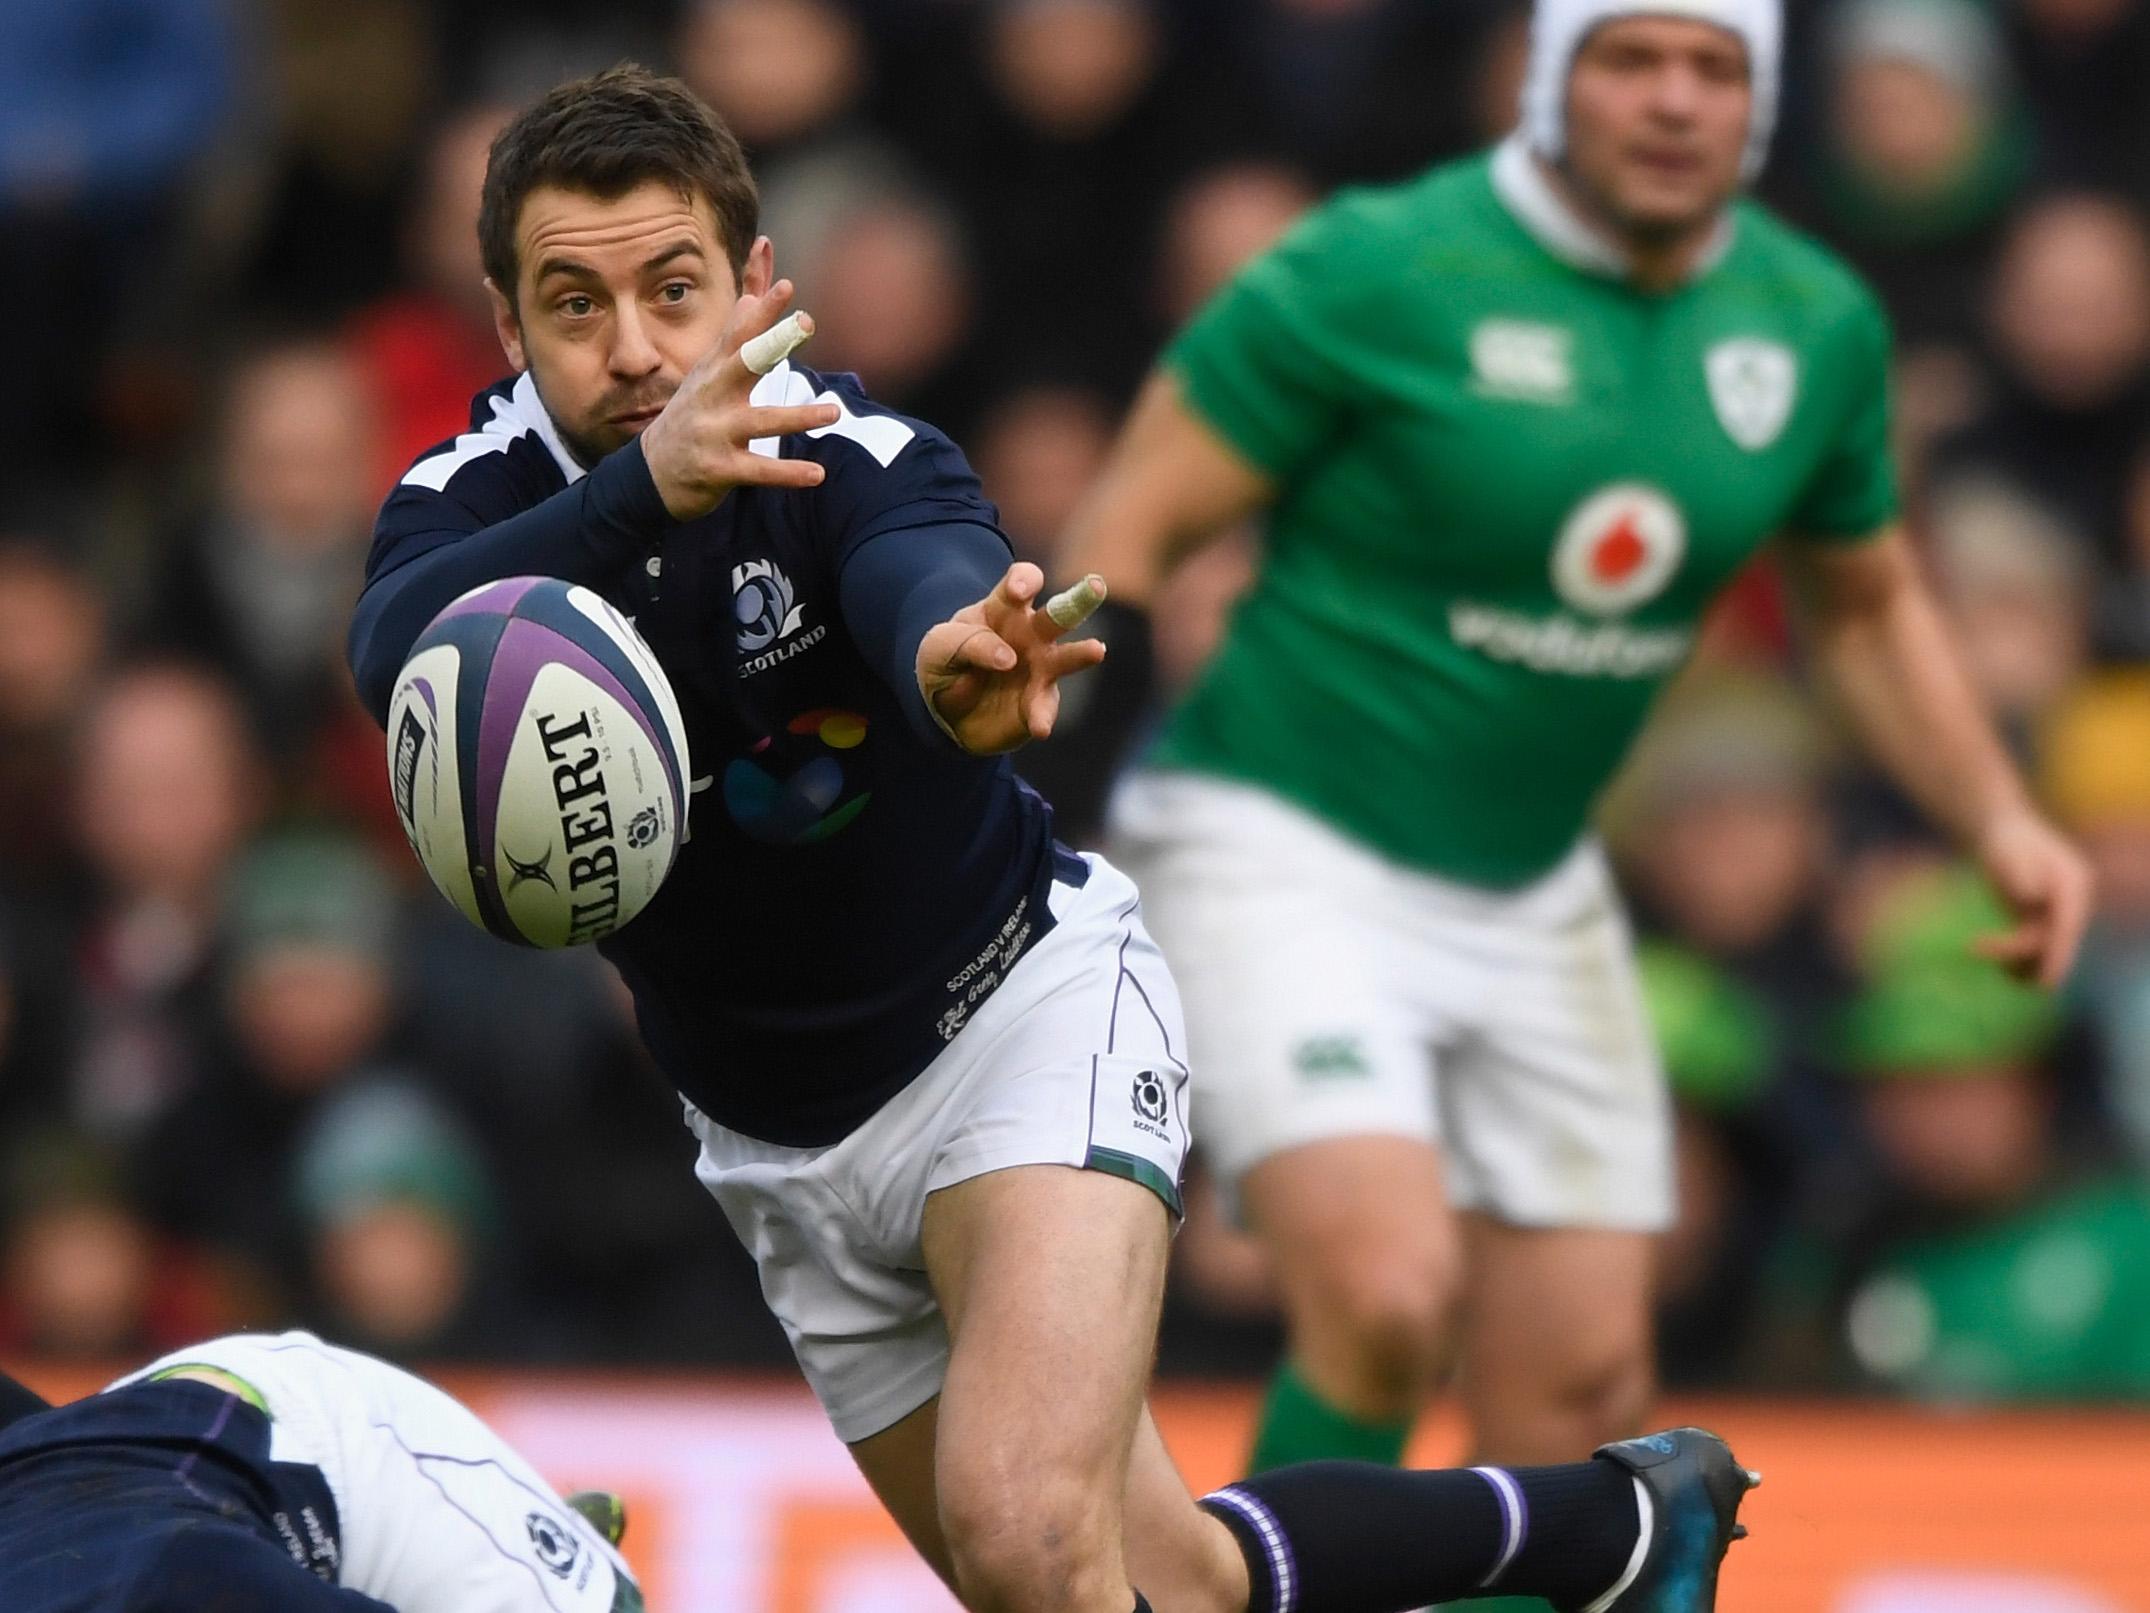 Laidlaw was the coolest man in the stadium when slotting the winning penalties